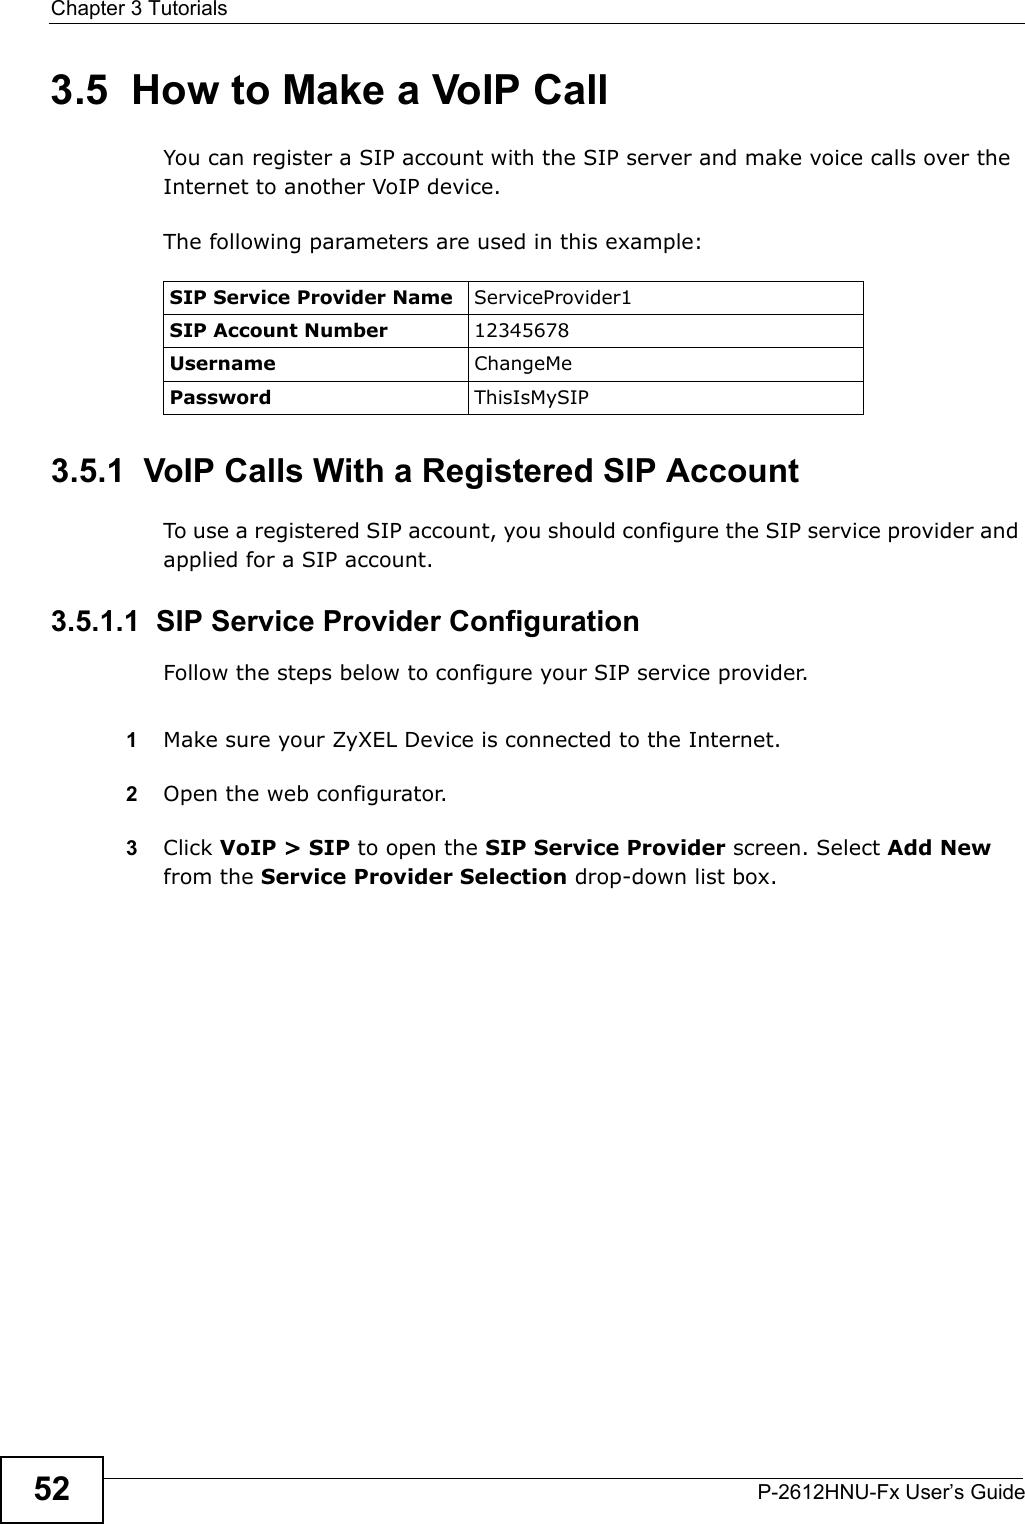 Chapter 3 TutorialsP-2612HNU-Fx User’s Guide523.5  How to Make a VoIP CallYou can register a SIP account with the SIP server and make voice calls over the Internet to another VoIP device.The following parameters are used in this example:3.5.1  VoIP Calls With a Registered SIP AccountTo use a registered SIP account, you should configure the SIP service provider and applied for a SIP account.3.5.1.1  SIP Service Provider ConfigurationFollow the steps below to configure your SIP service provider.1Make sure your ZyXEL Device is connected to the Internet.2Open the web configurator.3Click VoIP &gt; SIP to open the SIP Service Provider screen. Select Add New from the Service Provider Selection drop-down list box.SIP Service Provider Name ServiceProvider1SIP Account Number 12345678Username ChangeMePassword ThisIsMySIP